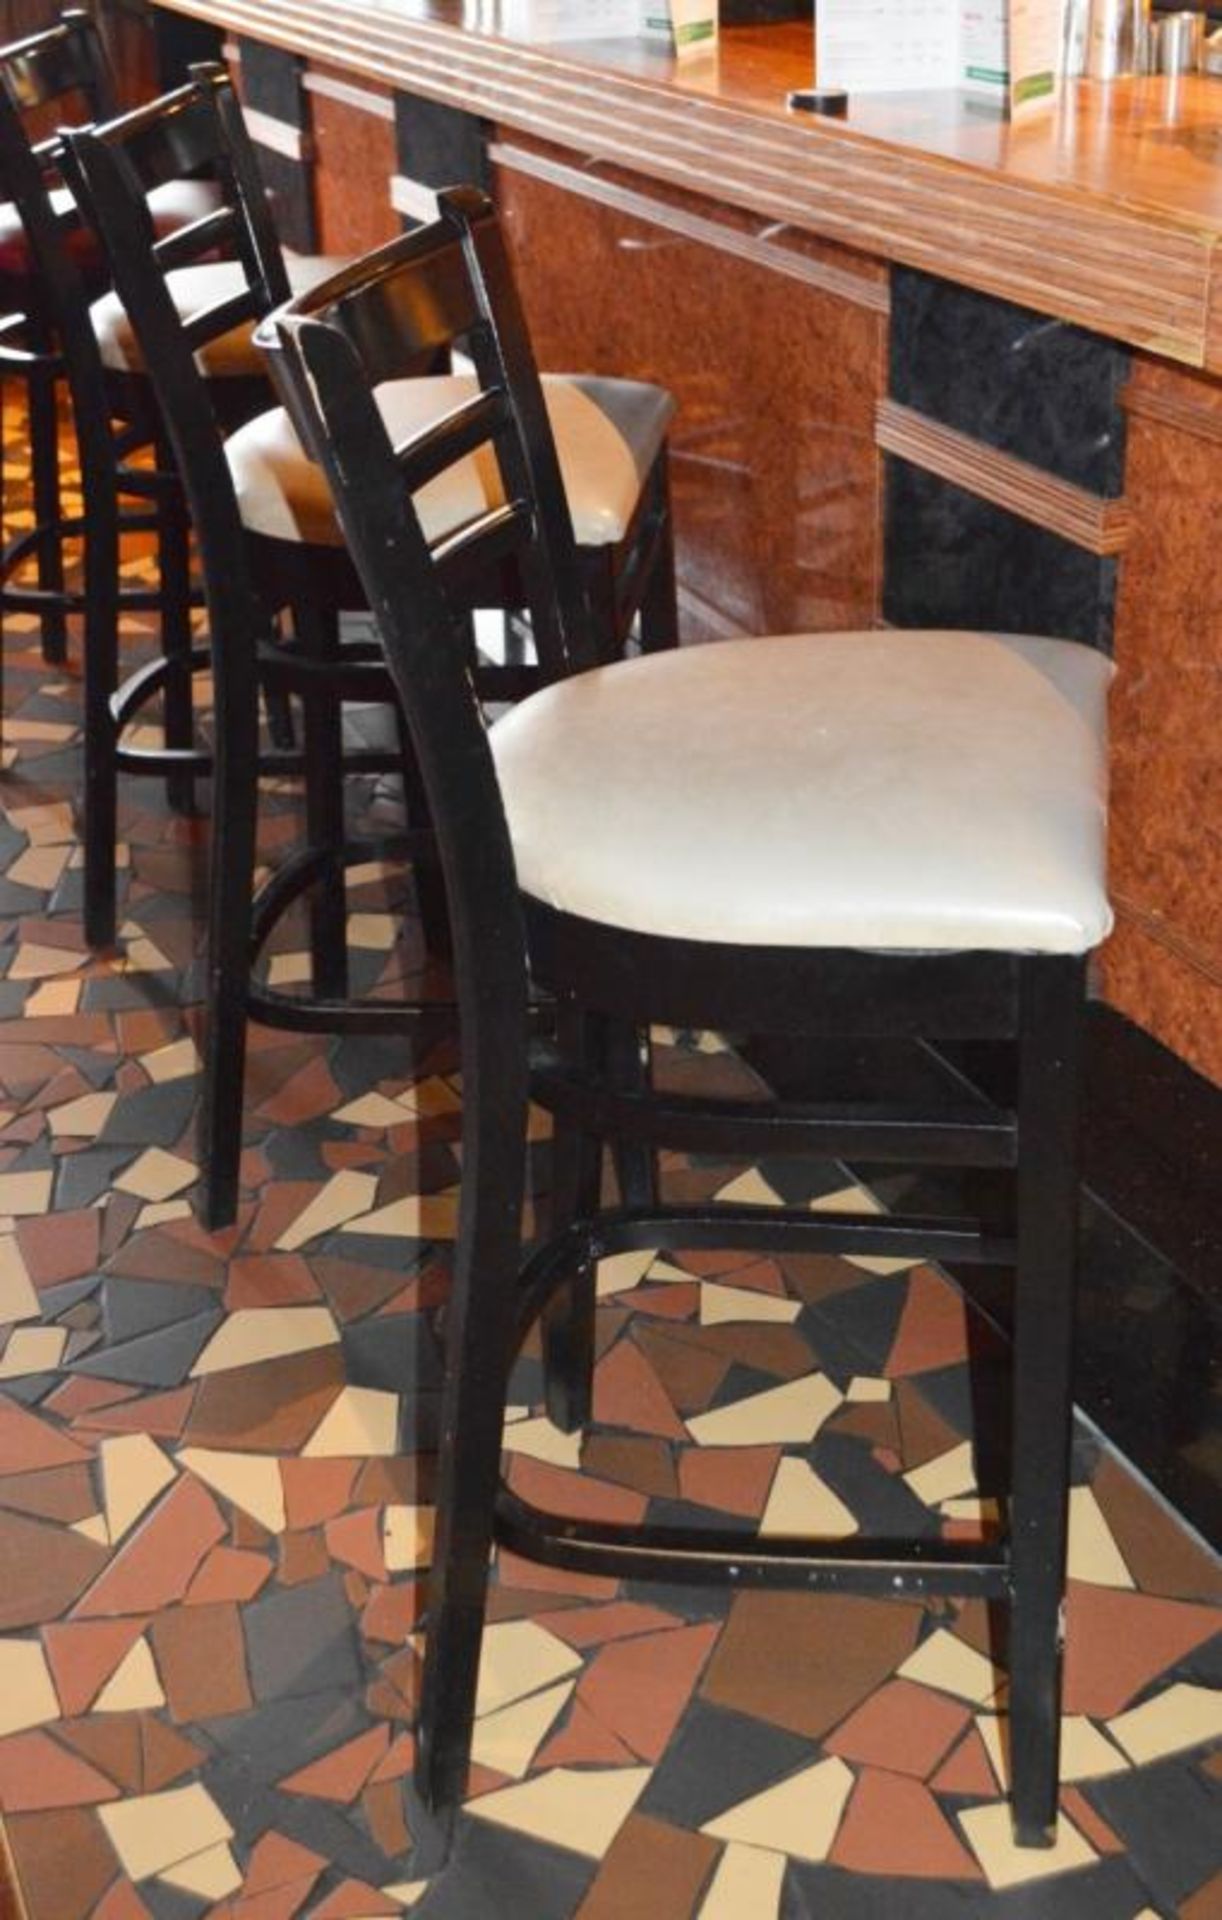 8 x Ladderback Bar Stools in Black and Cream and Red Faux Leather Seat Pads - CL357 - Location: Bolt - Image 7 of 9